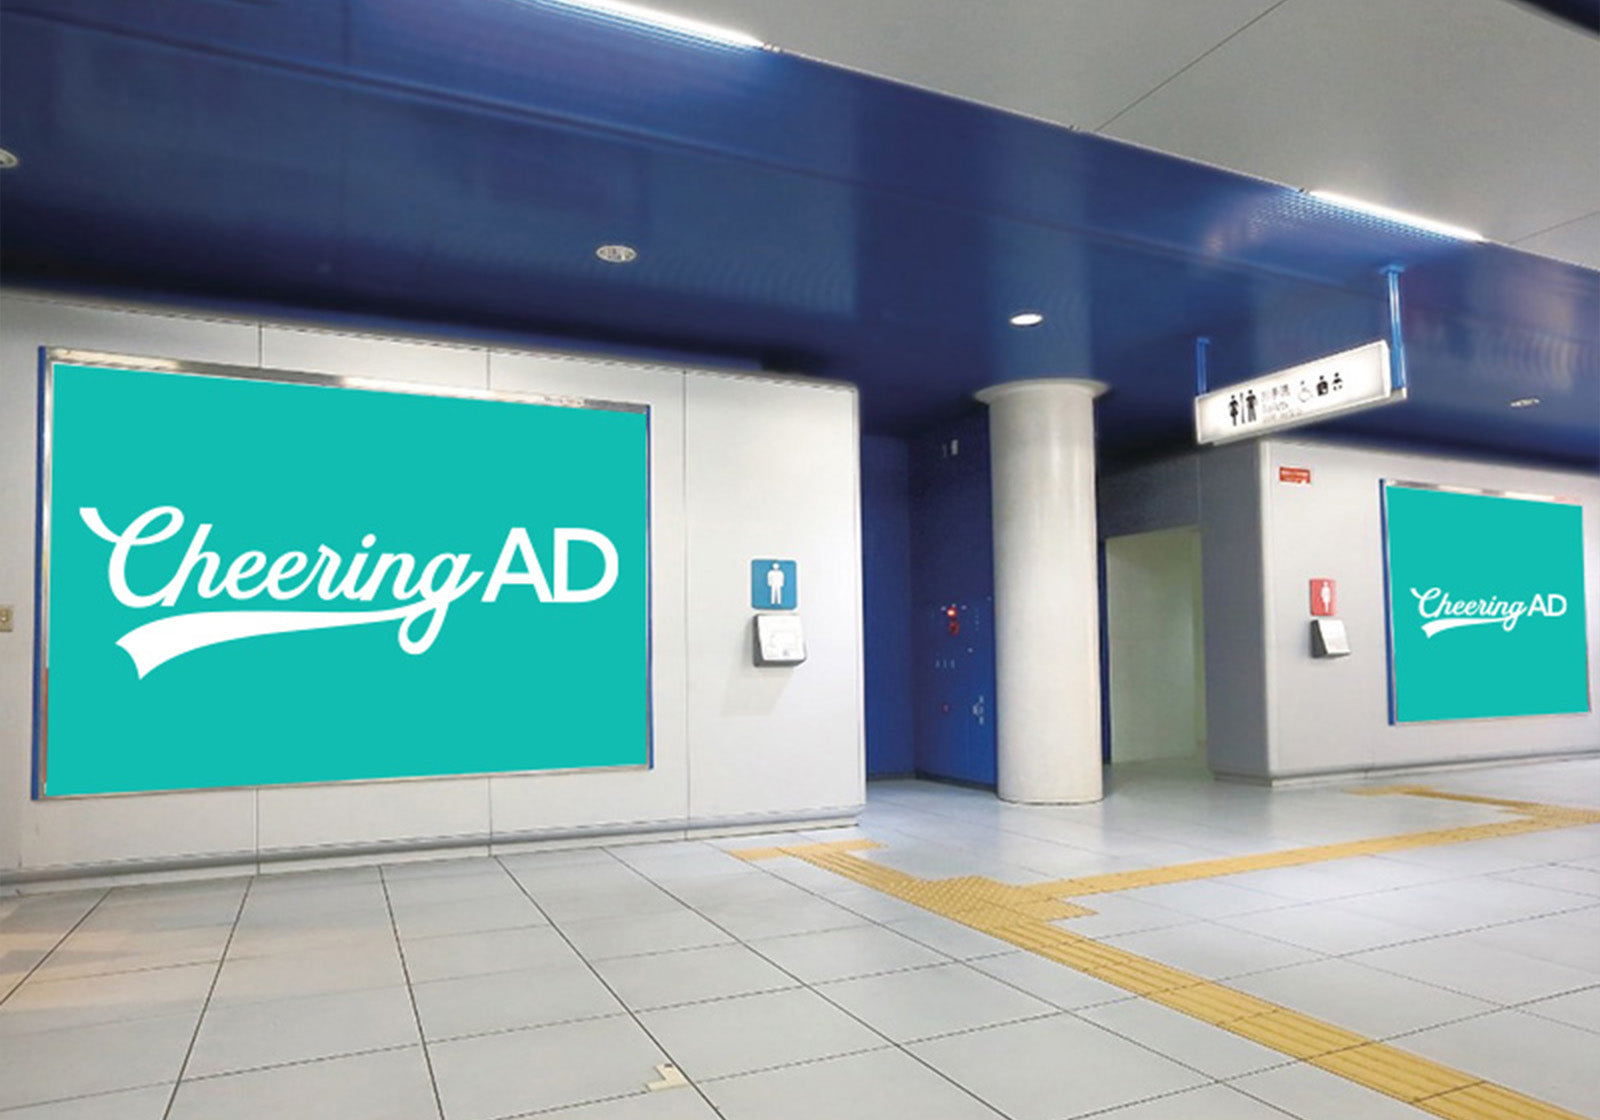 Station advertisement / outdoor advertising image